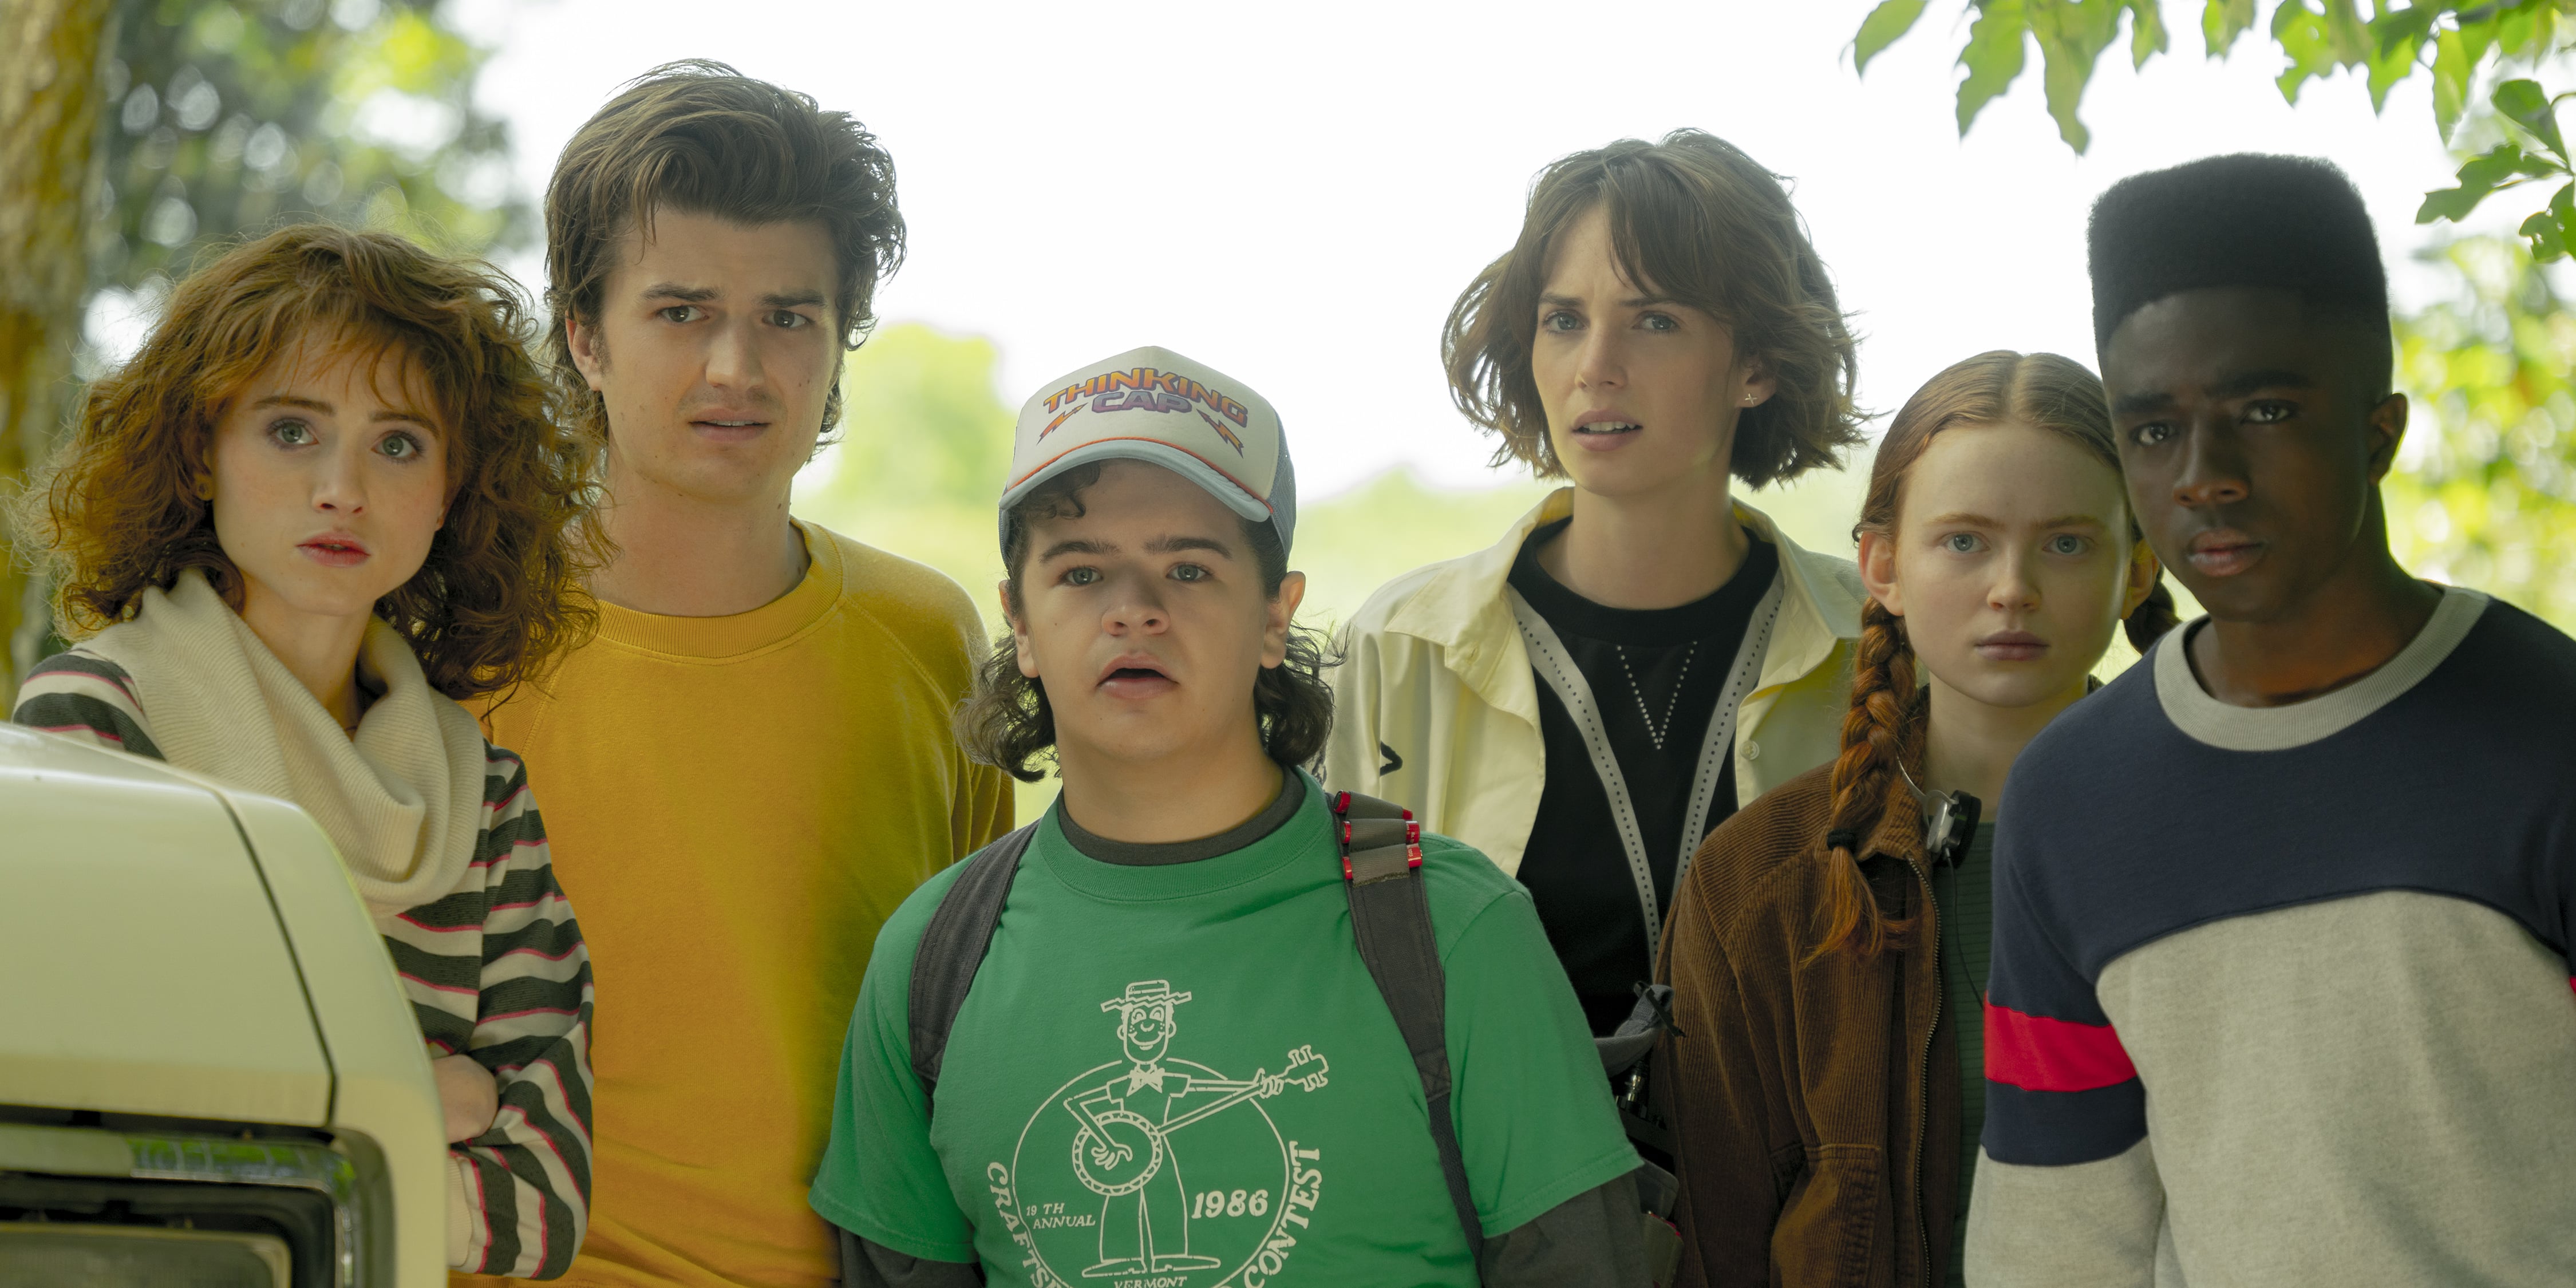 Mike Wheeler's non-story was 'Stranger Things 2' at its weakest